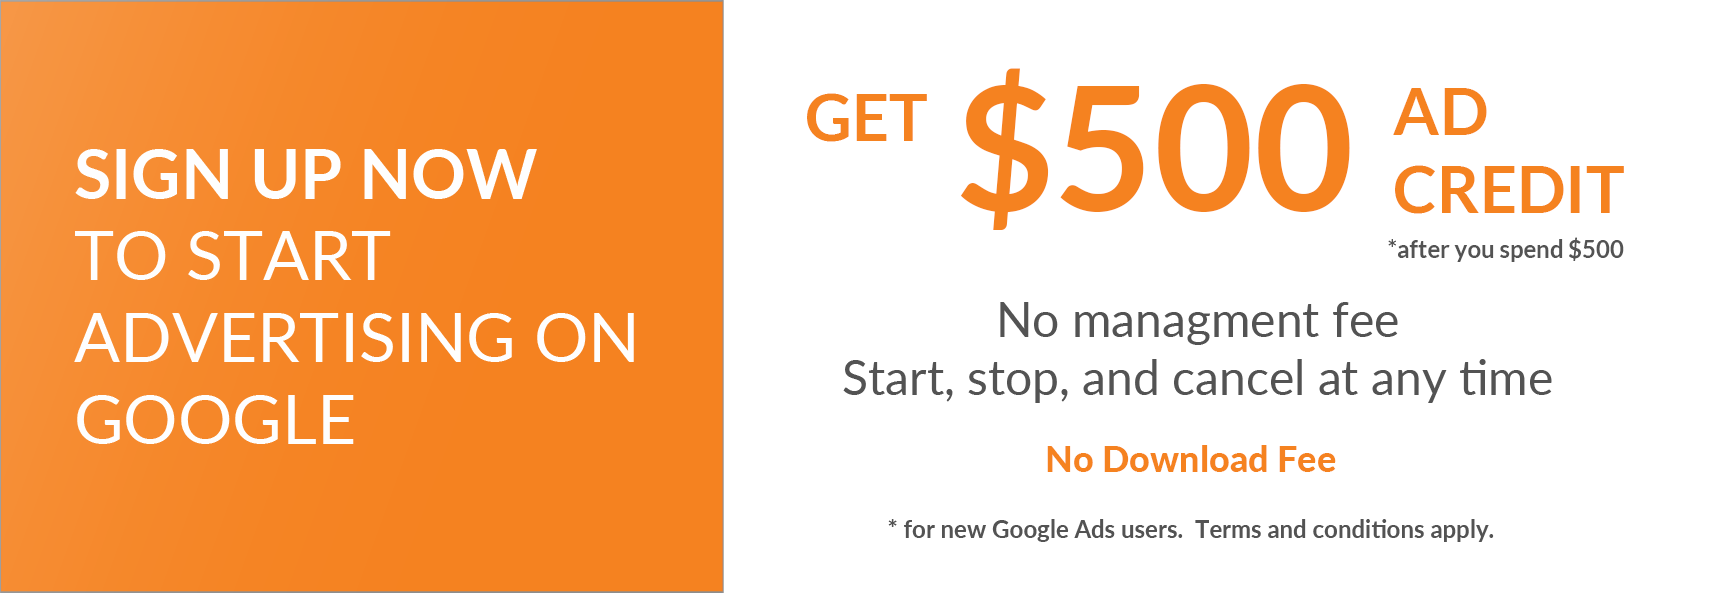 Google Ads Special spend $500 and recieve $500 in ad credit